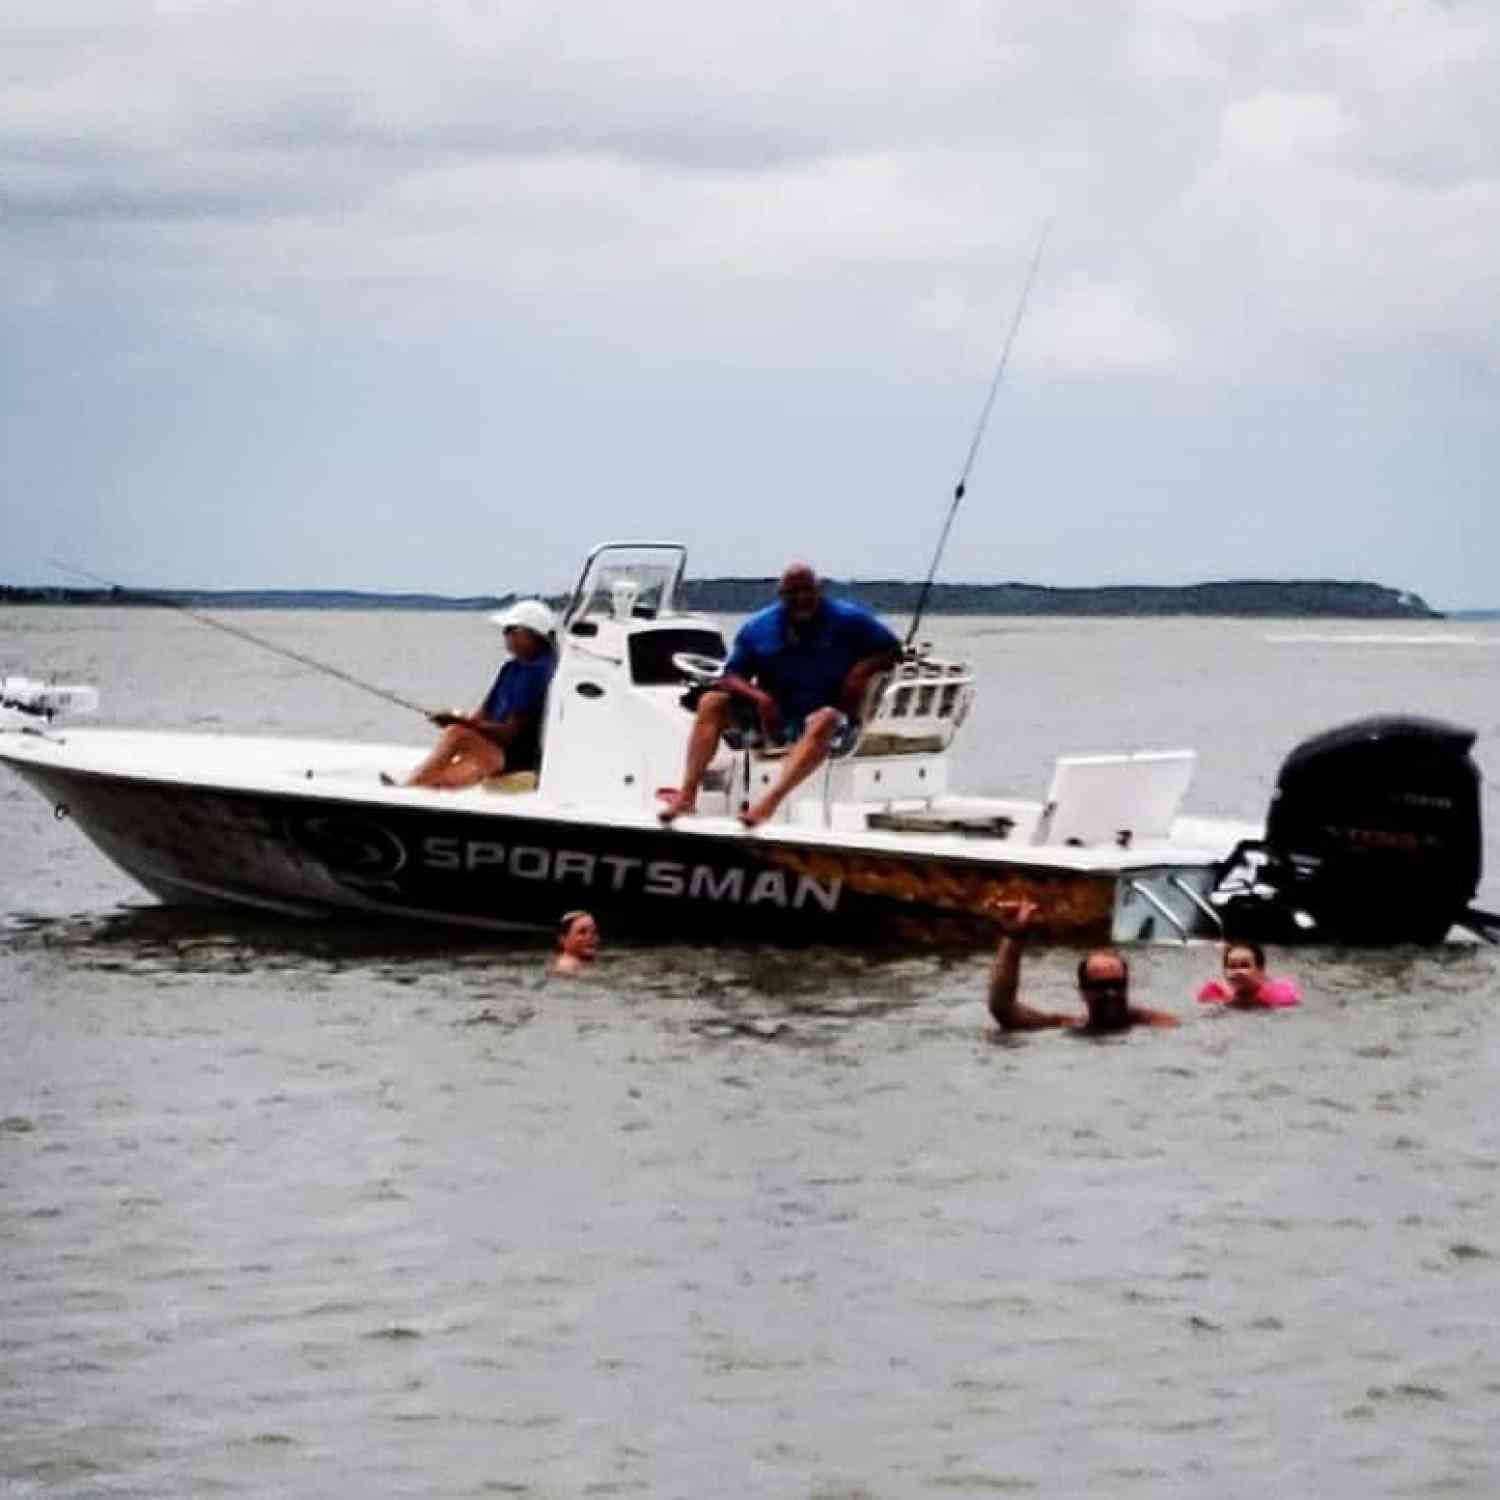 Title: Family Day - On board their Sportsman Tournament 234 Bay Boat - Location: Shellman Bluff, Ga. Participating in the Photo Contest #SportsmanApril2019